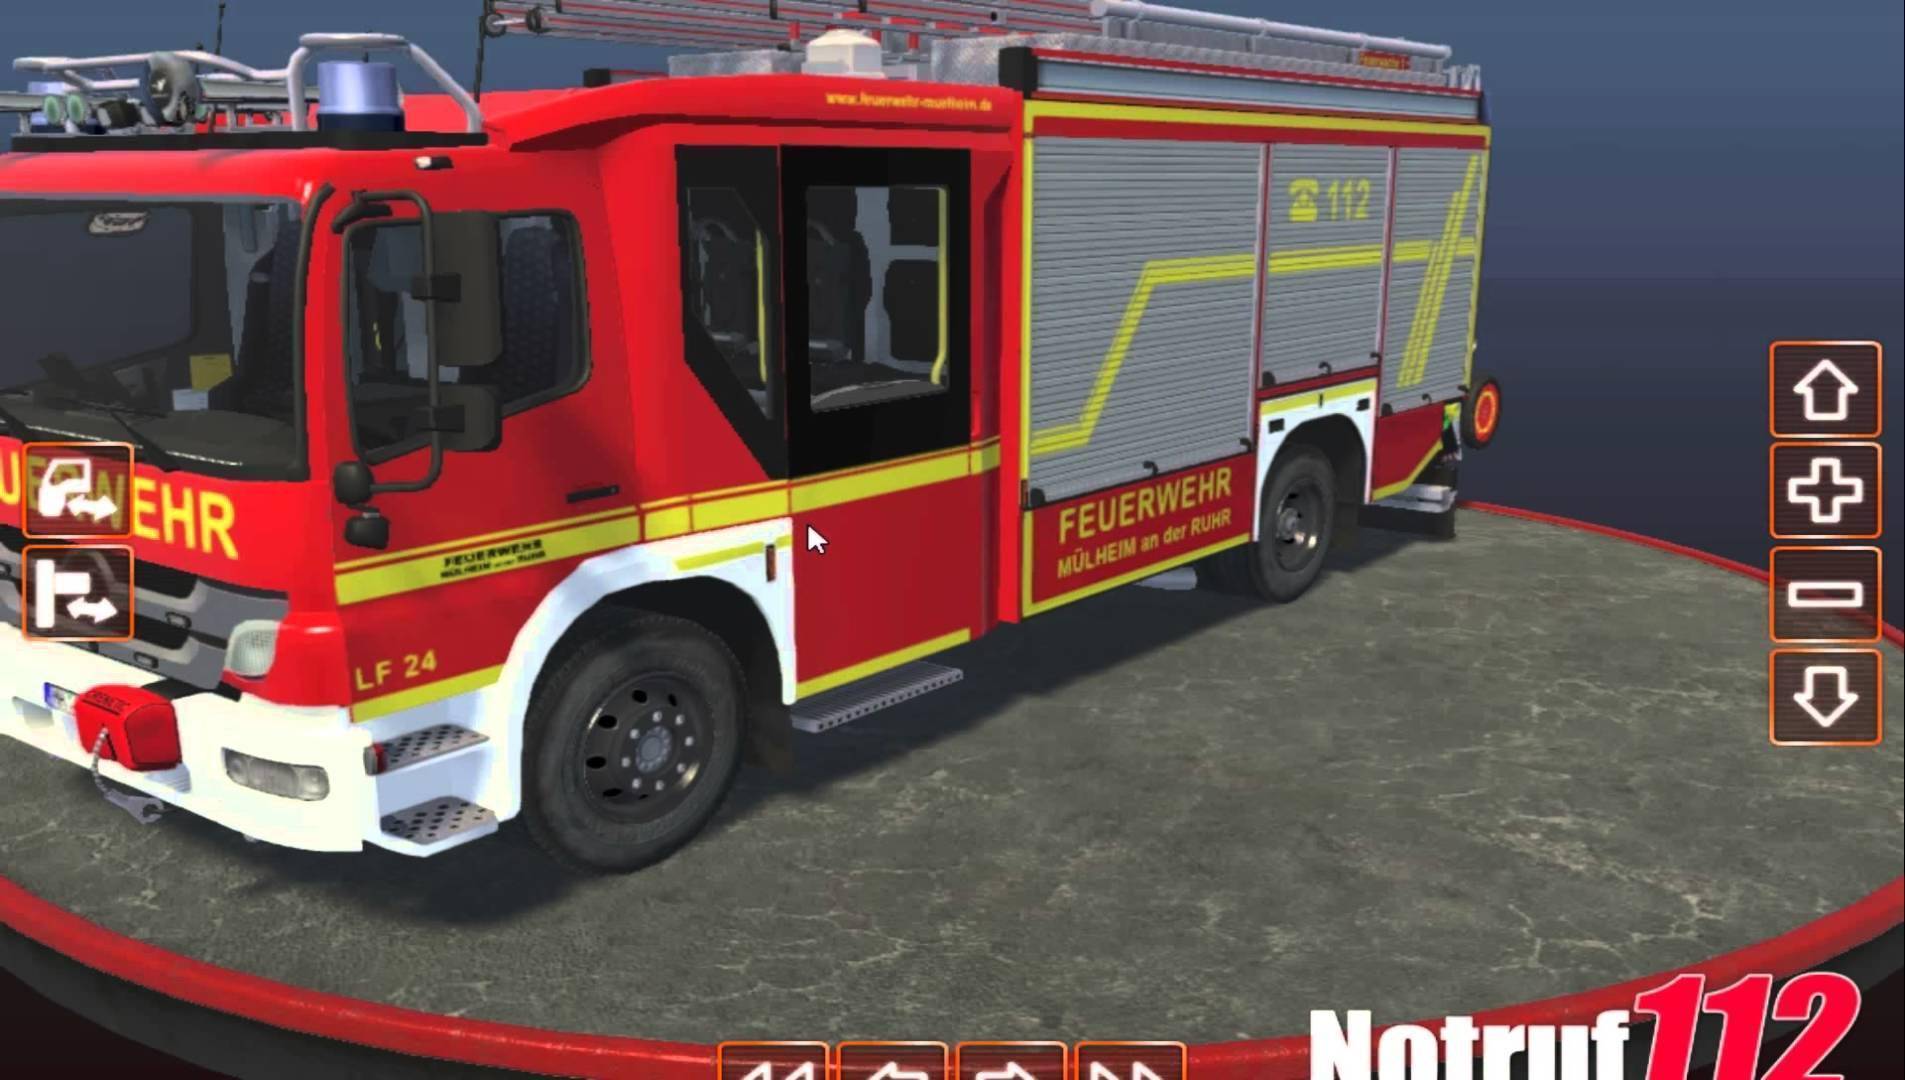 Emergency Call Steam (PC) cheap Fire for Simulation of - $6.31 Key Fighting The Price 112